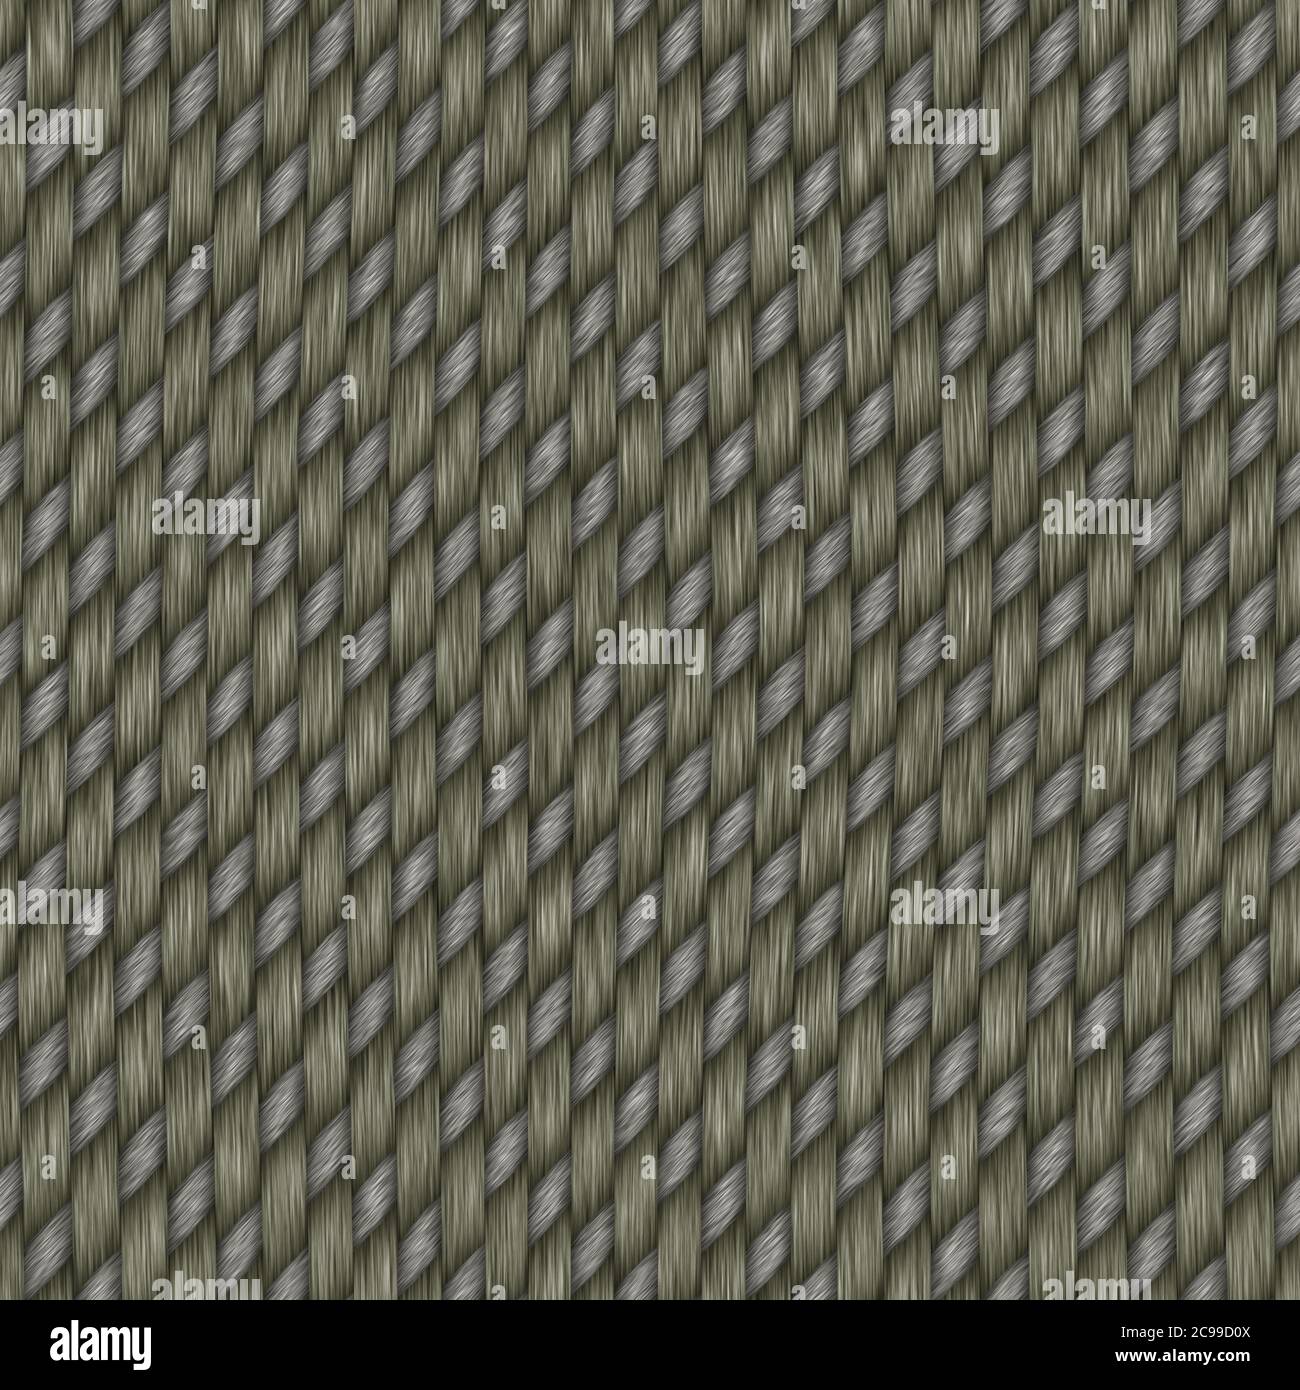 Seamless woven yarn texture background. Realistic wool thread warp weft effect pattern. Faux woven all over print textile fabric. Stock Photo